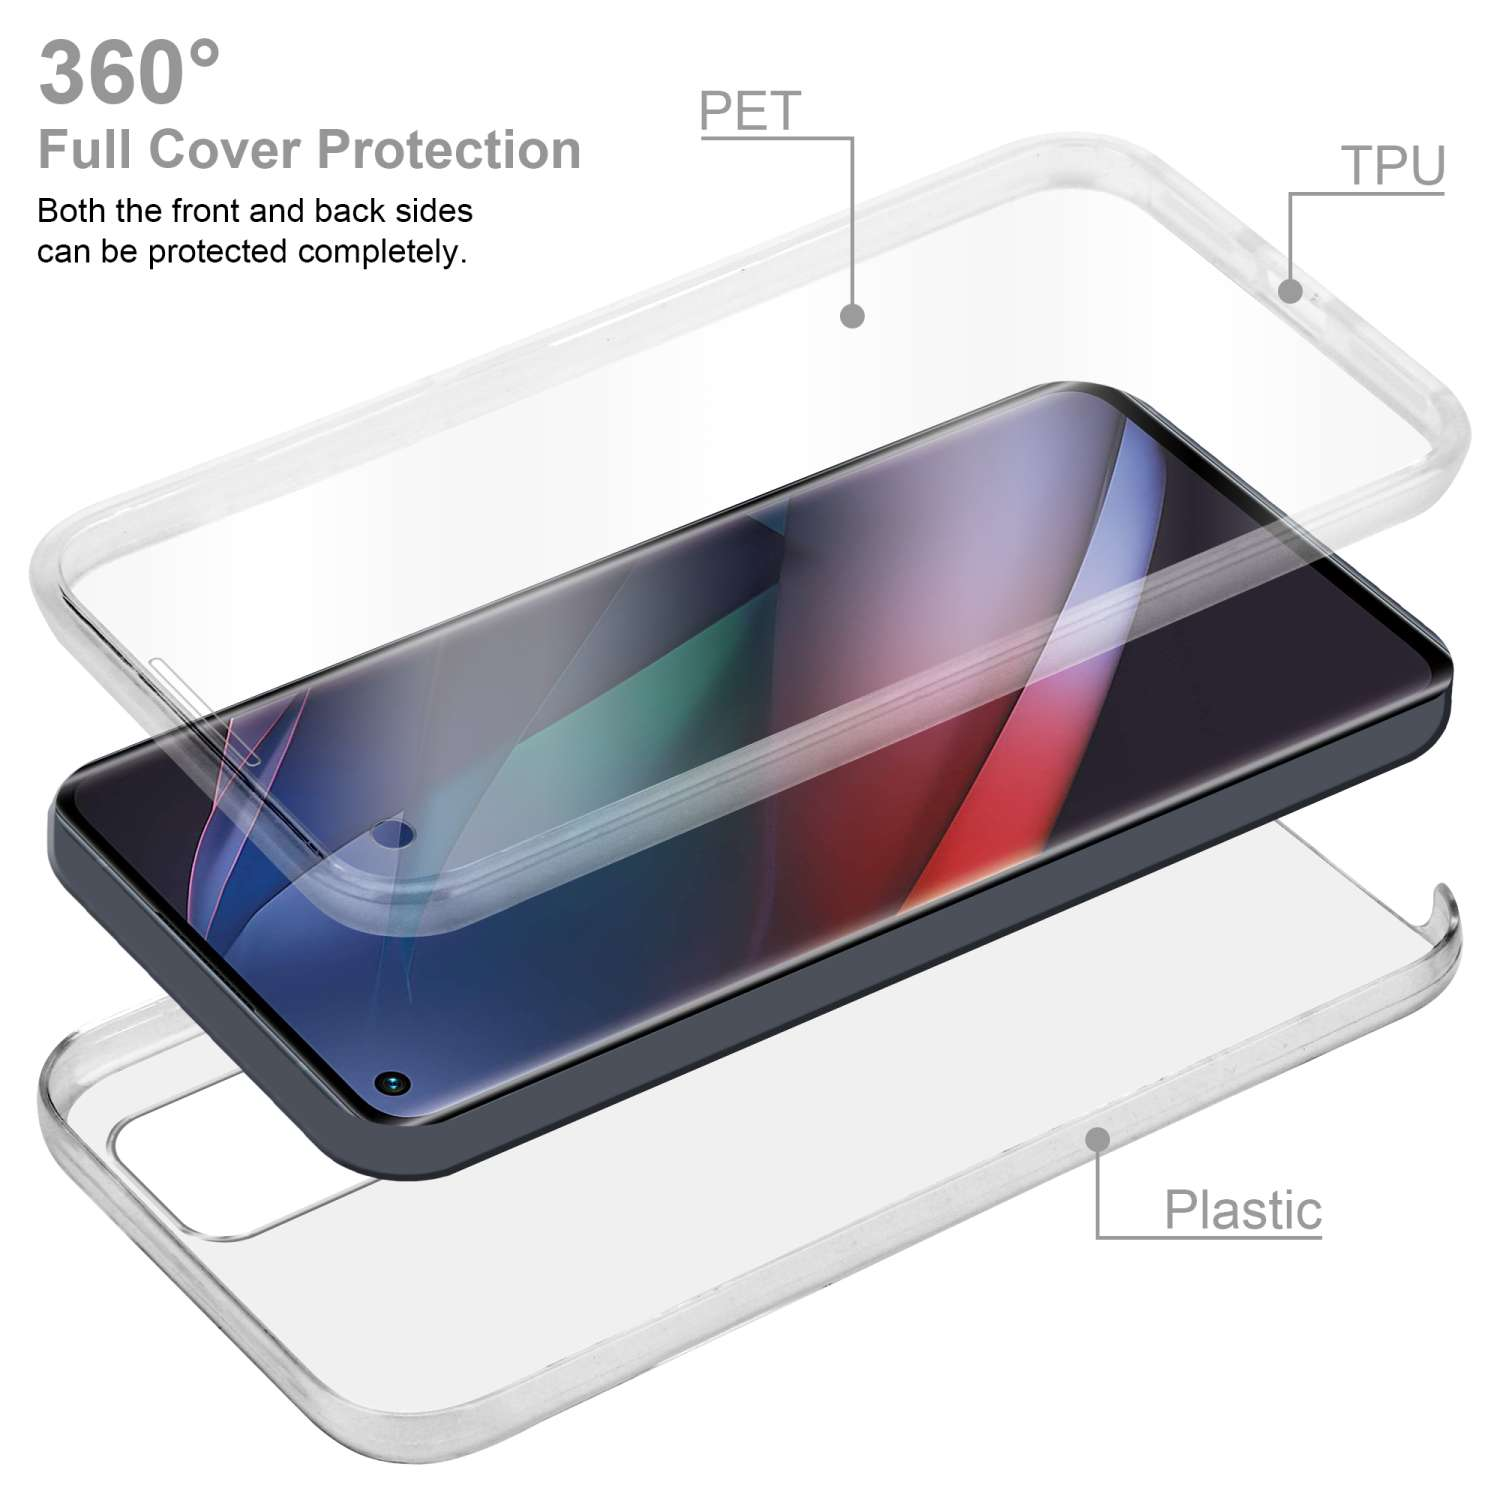 Backcover, TRANSPARENT NEO, 360 Hülle, X3 FIND CADORABO TPU Grad Oppo, Case